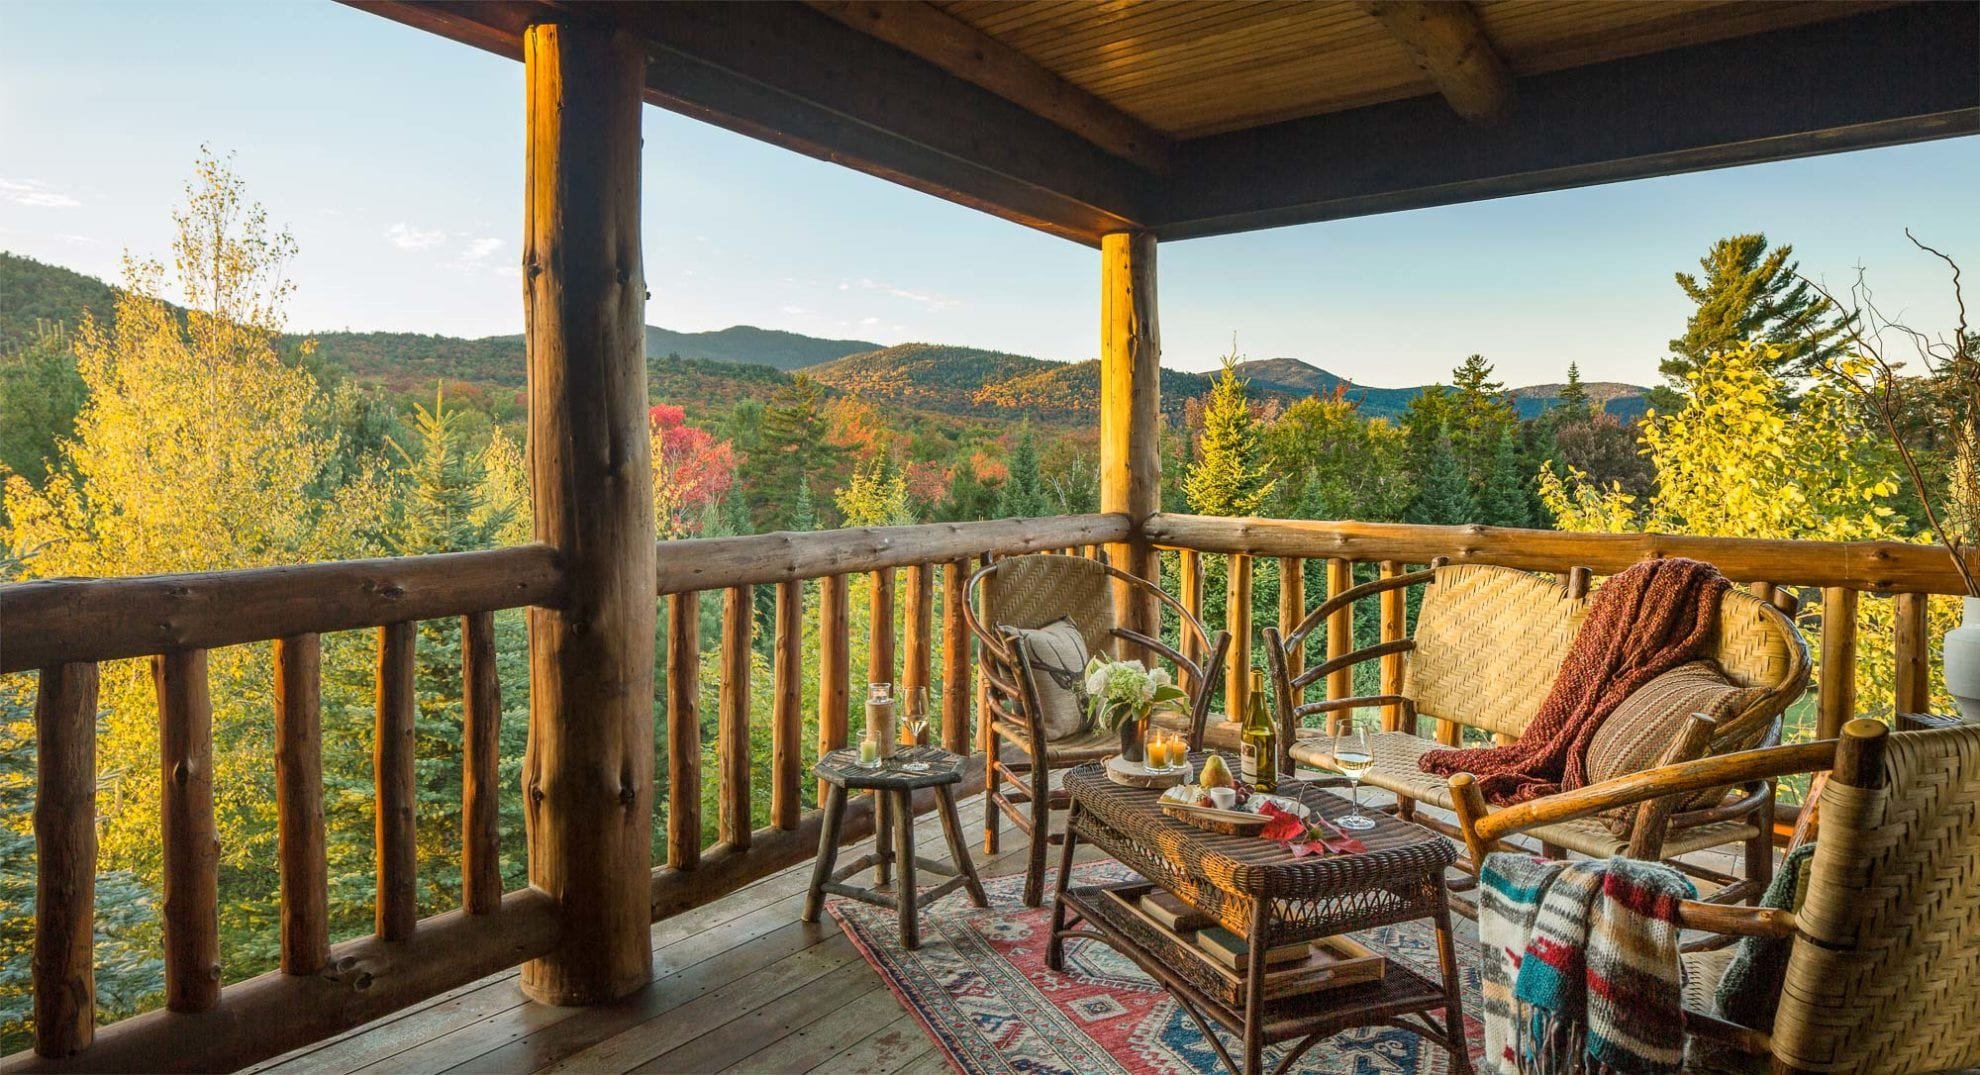 STAY_LUXURY RESORT_TRI-LAKES & HIGH PEAKS_LAKE PLACID-WHITEFACE LODGE_PRIVATE PORCH.jpeg